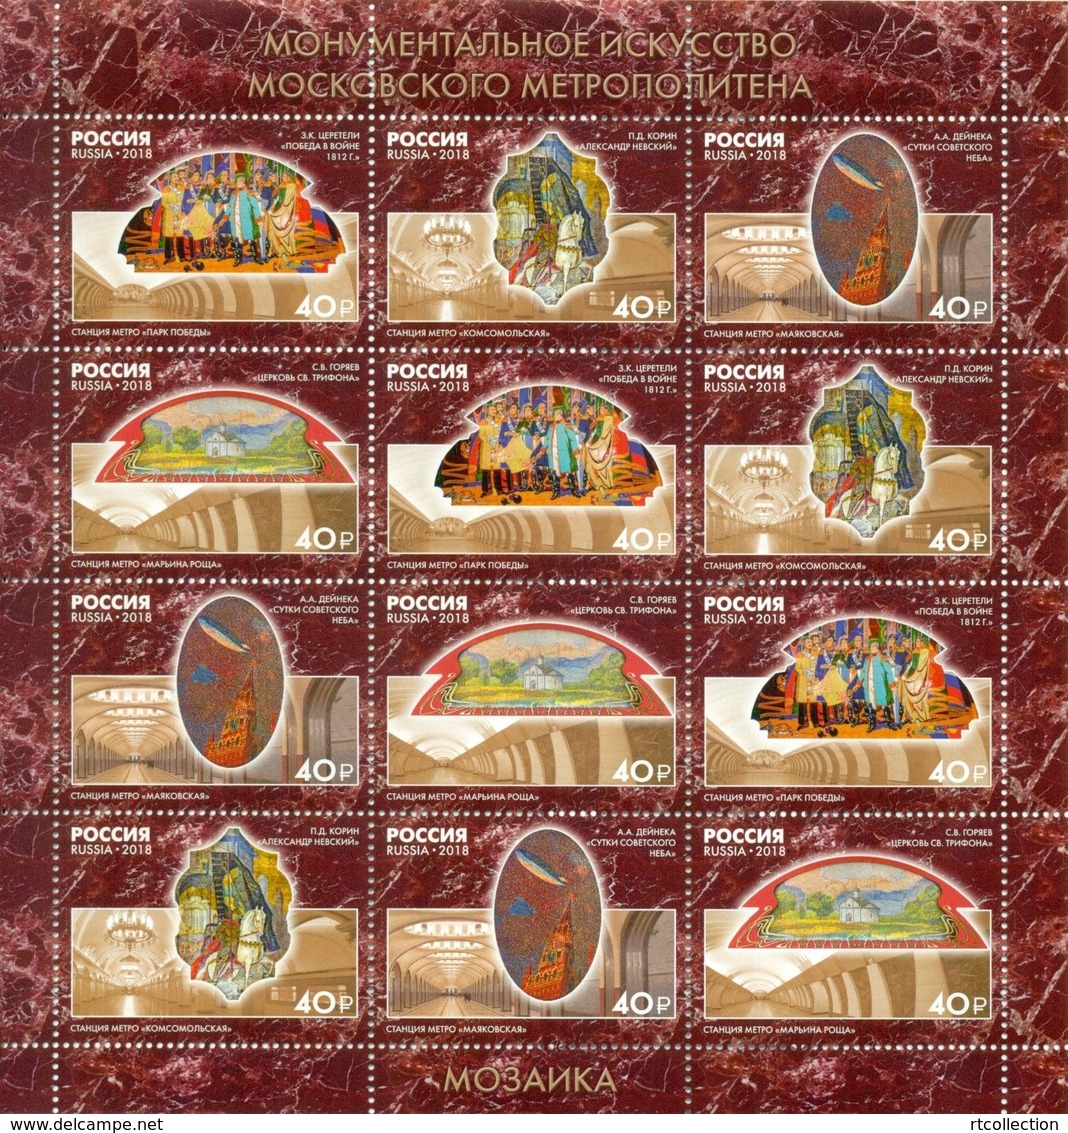 Russia 2018 Sheet Monumental Art Moscow Metro Station Architecture Subway Cultures Transport Train Stamps MNH Mi 2584-87 - Trenes